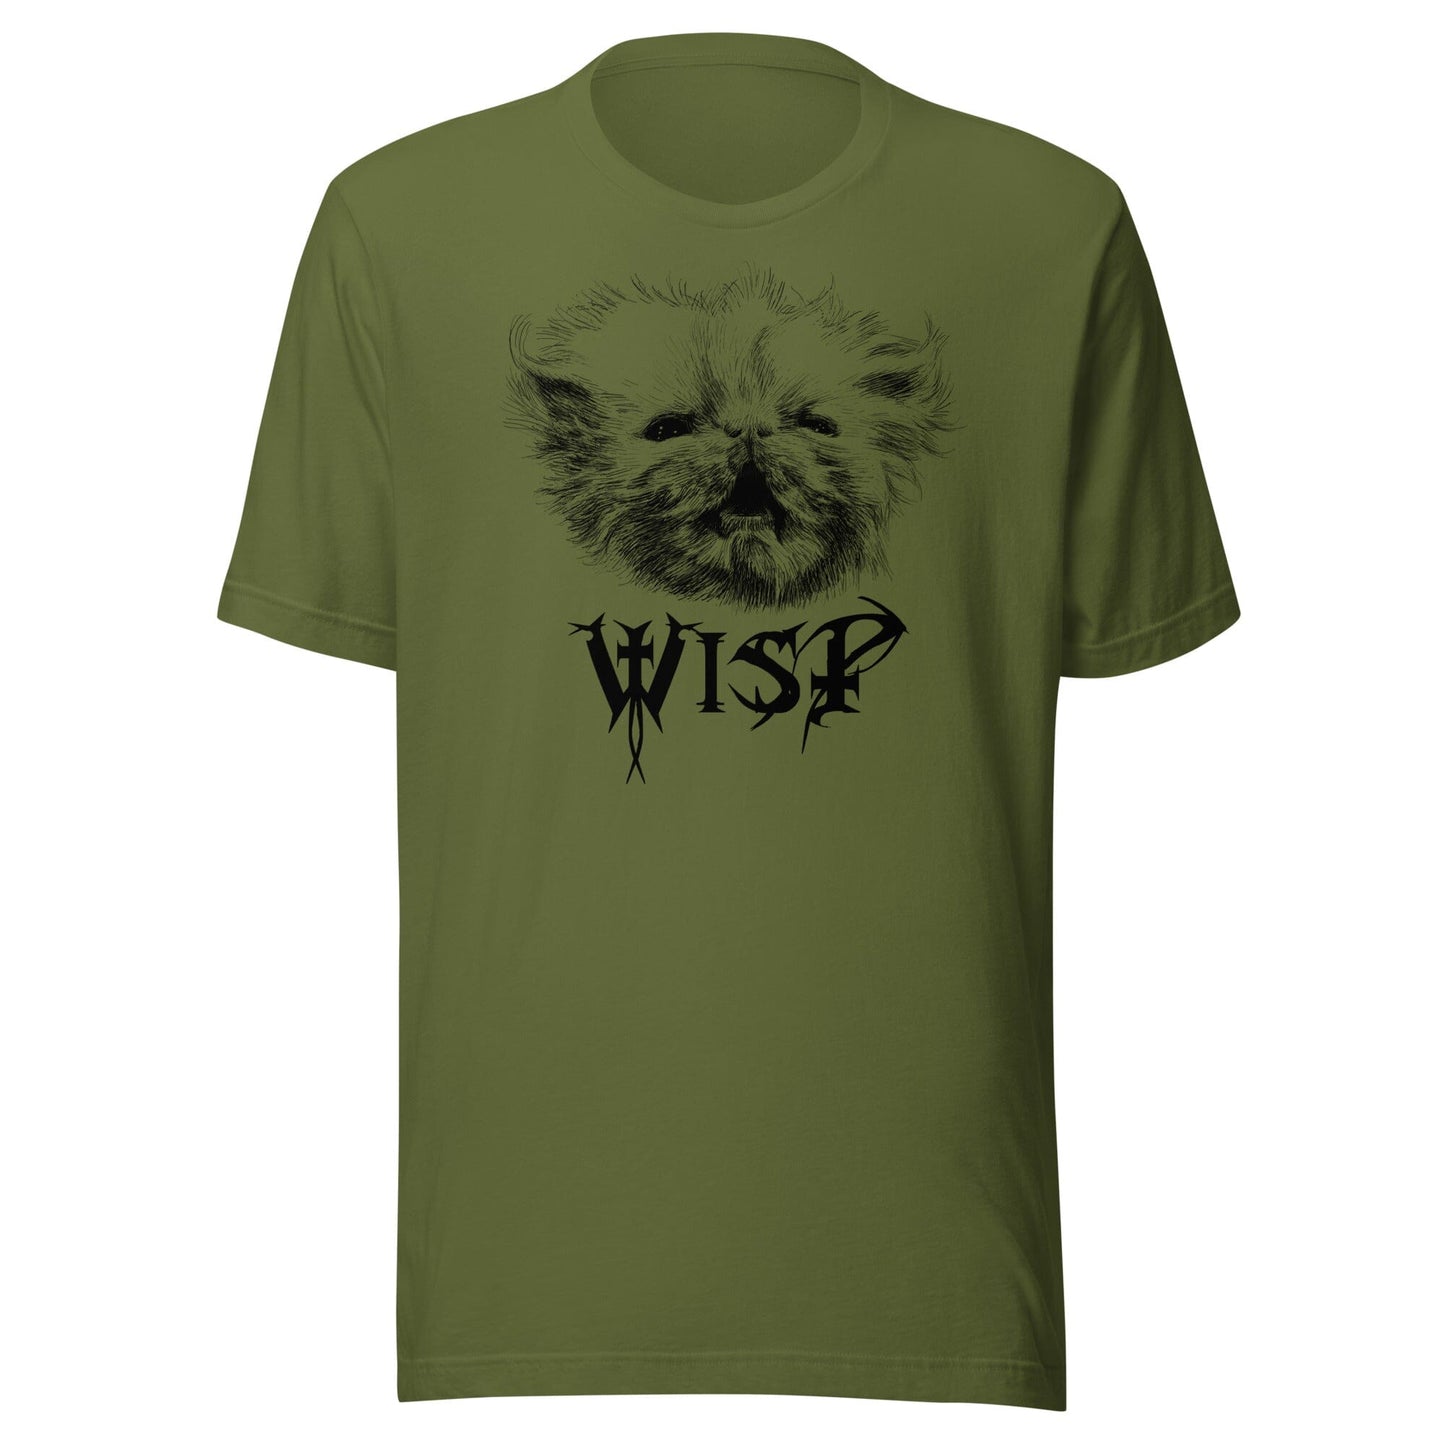 Metal Wisp T-Shirt [Unfoiled] (All net proceeds go to Rags to Riches Animal Rescue) JoyousJoyfulJoyness Olive S 